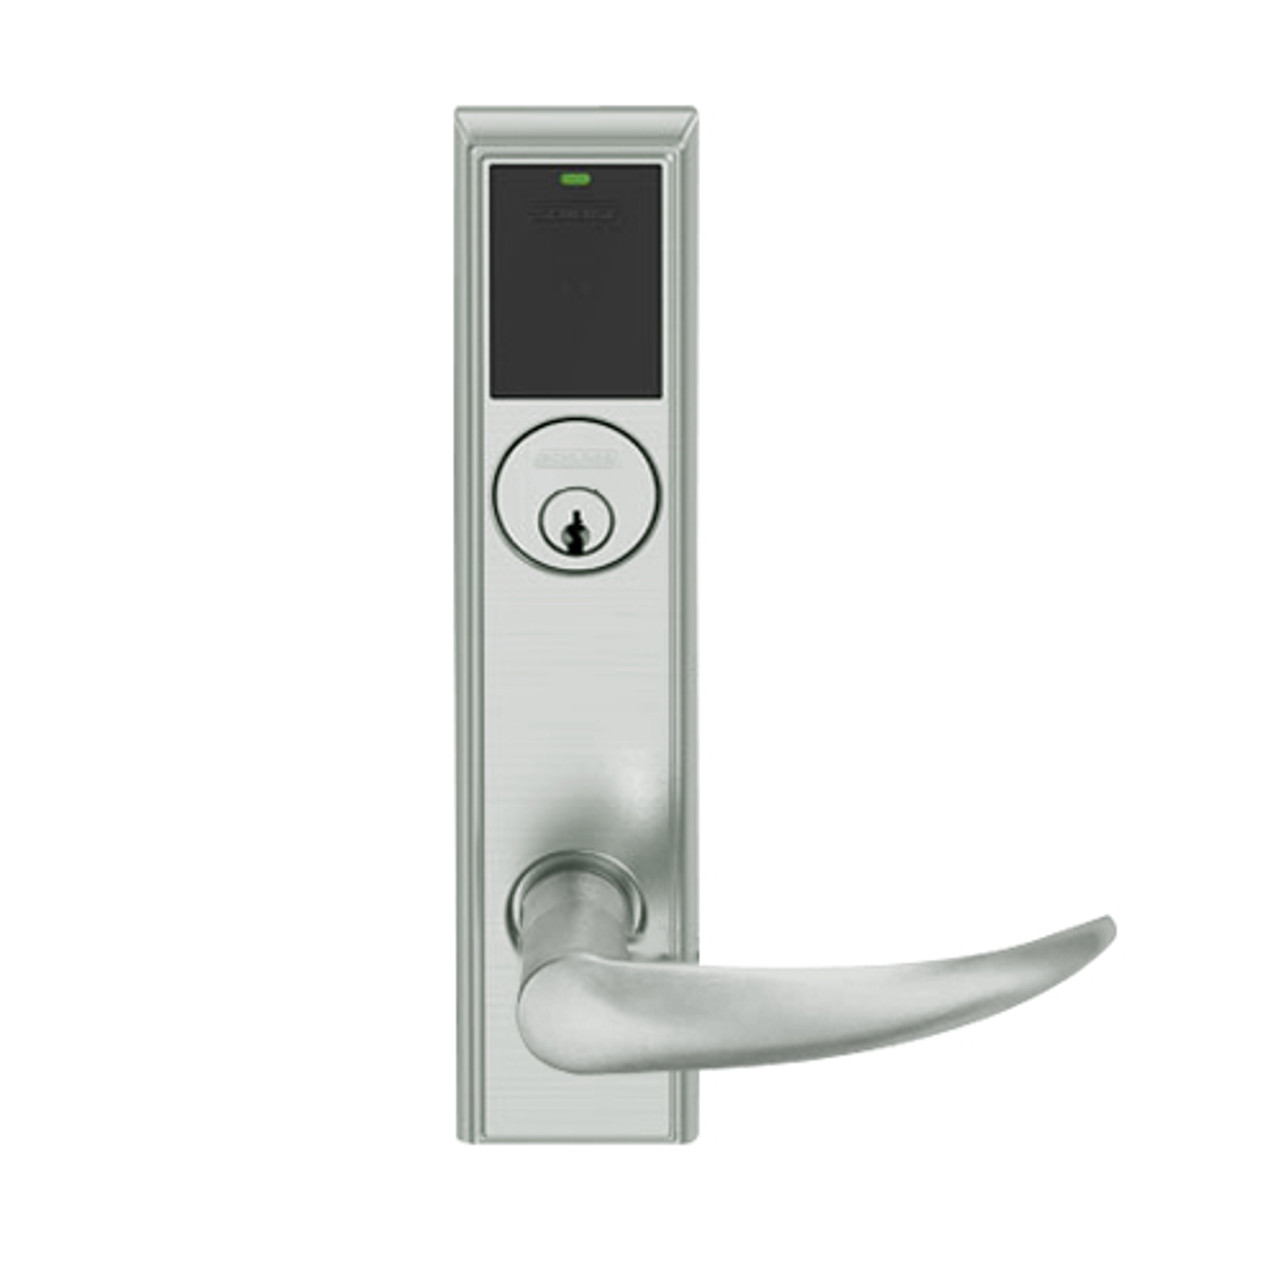 LEMB-ADD-P-OME-619 Schlage Privacy/Office Wireless Addison Mortise Lock with Push Button, LED and Omega Lever in Satin Nickel